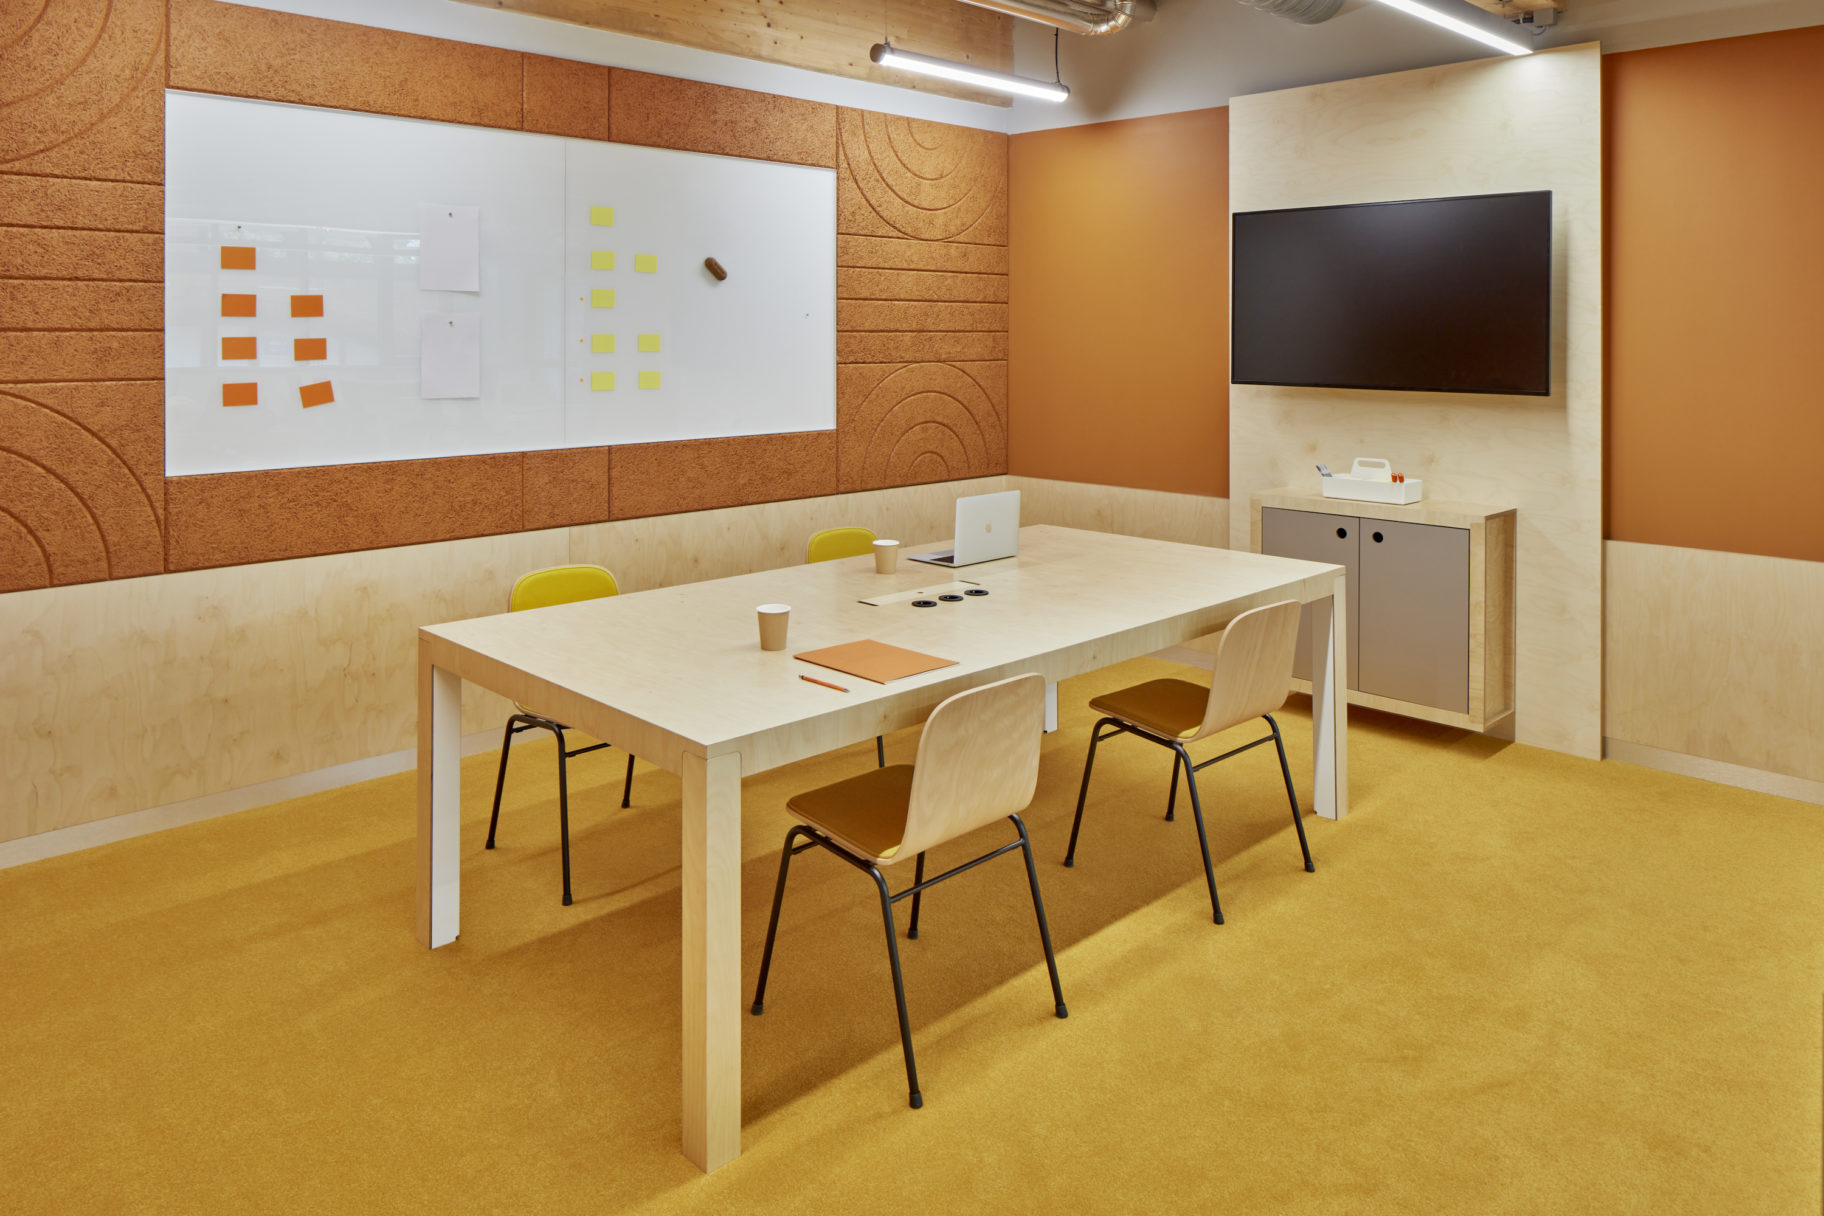 Payfit Offices in Paris - Meeting rooms, designed with BAUX Acoustic Wood Wool Panels